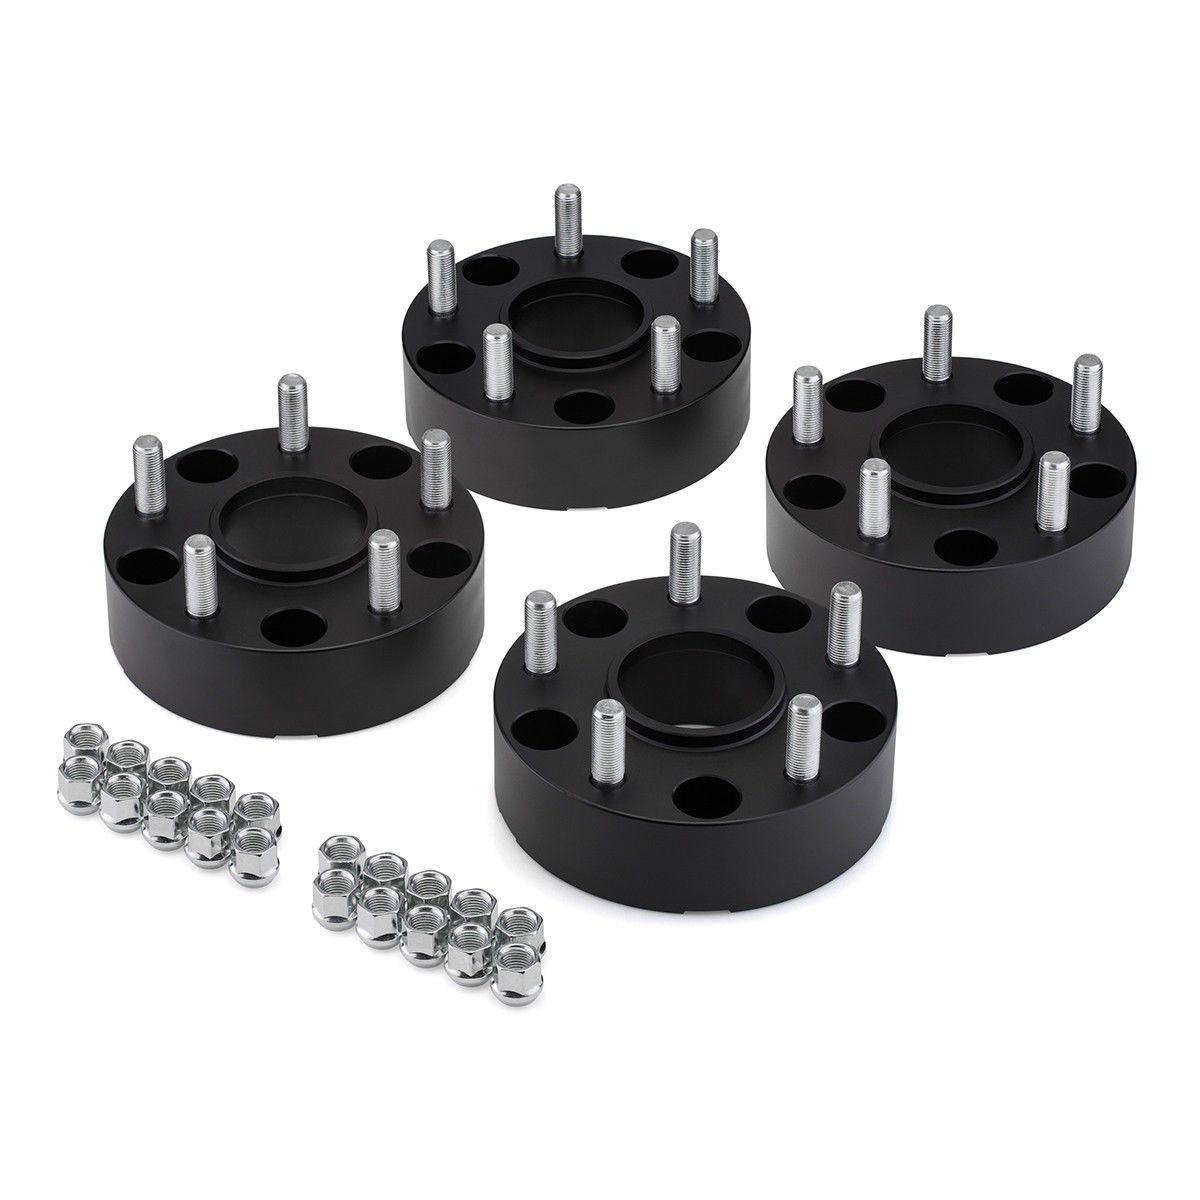 FITS 2009-2014 NISSAN 370Z Hub-Centric Wheel Spacers Kit (4pc)